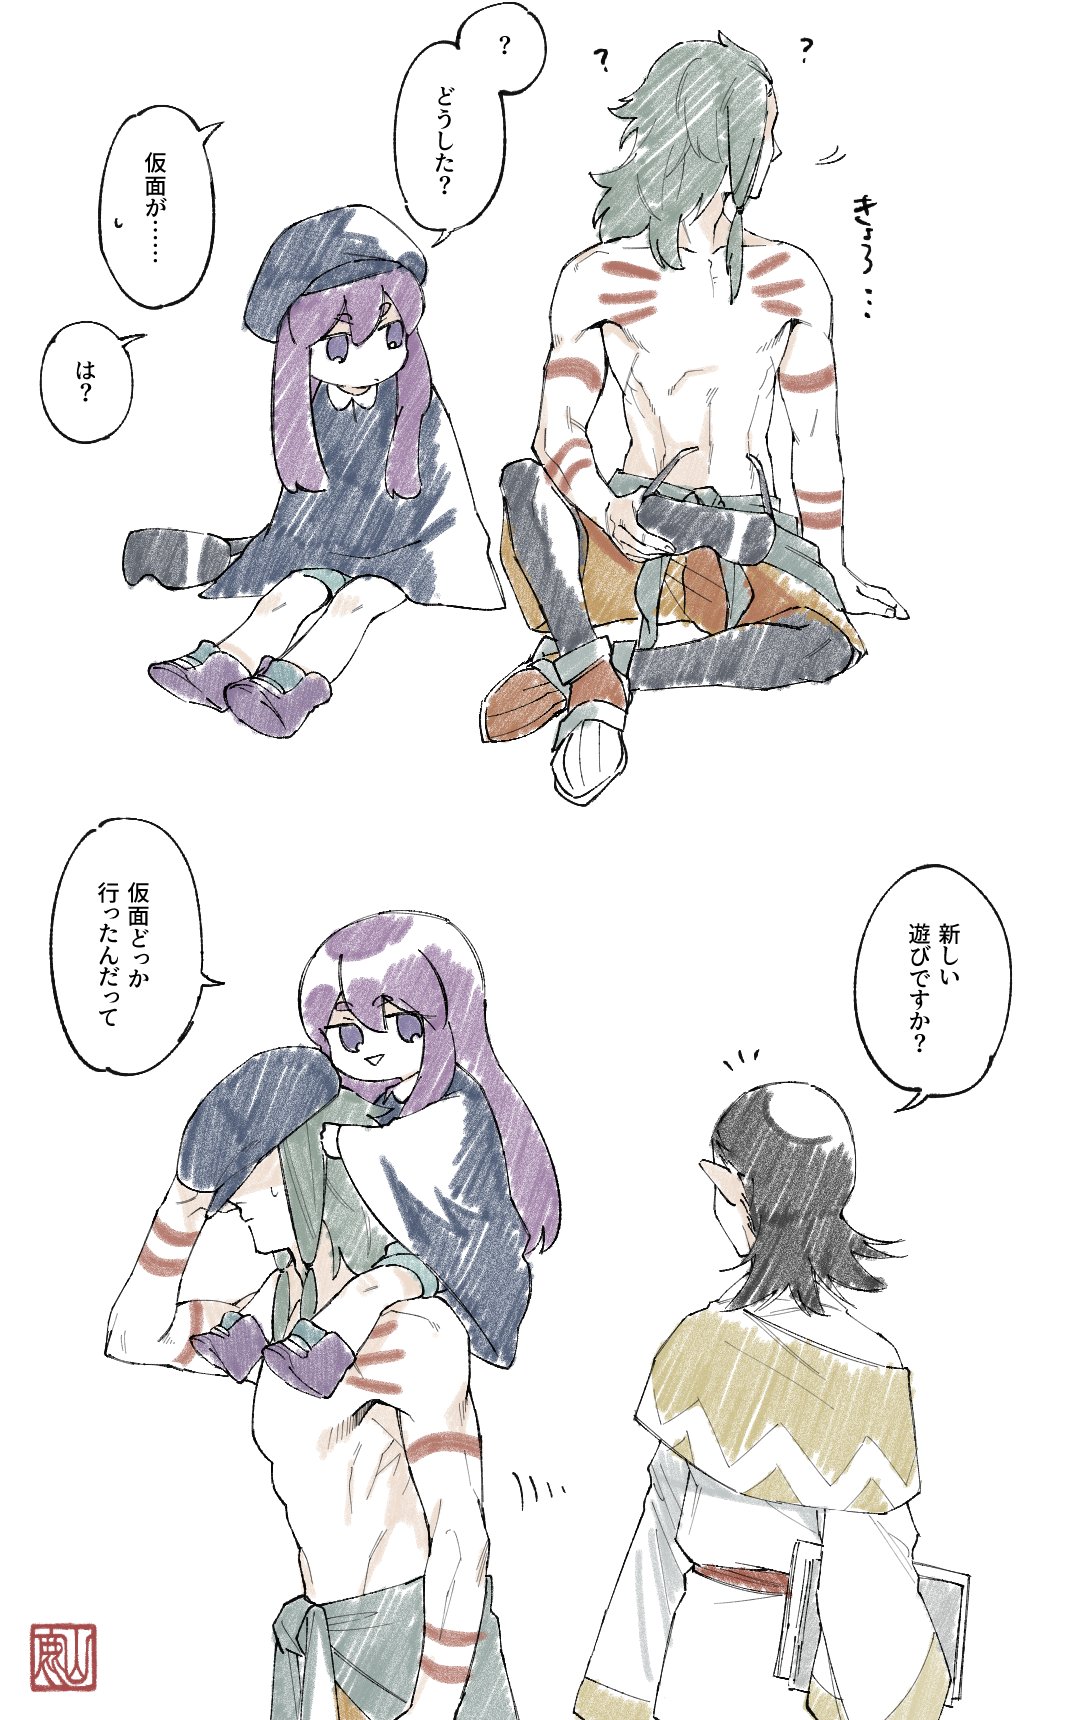 1girl 2boys a'long_(the_legend_of_luoxiaohei) black_hair black_headwear carrying covering_eyes guan_xuan_(the_legend_of_luoxiaohei) highres kuizhi_(the_legend_of_luoxiaohei) long_hair medium_hair multiple_boys purple_footwear shirtless shoes shoulder_carry simple_background sitting speech_bubble the_legend_of_luo_xiaohei translation_request triple_bambi upper_body white_background